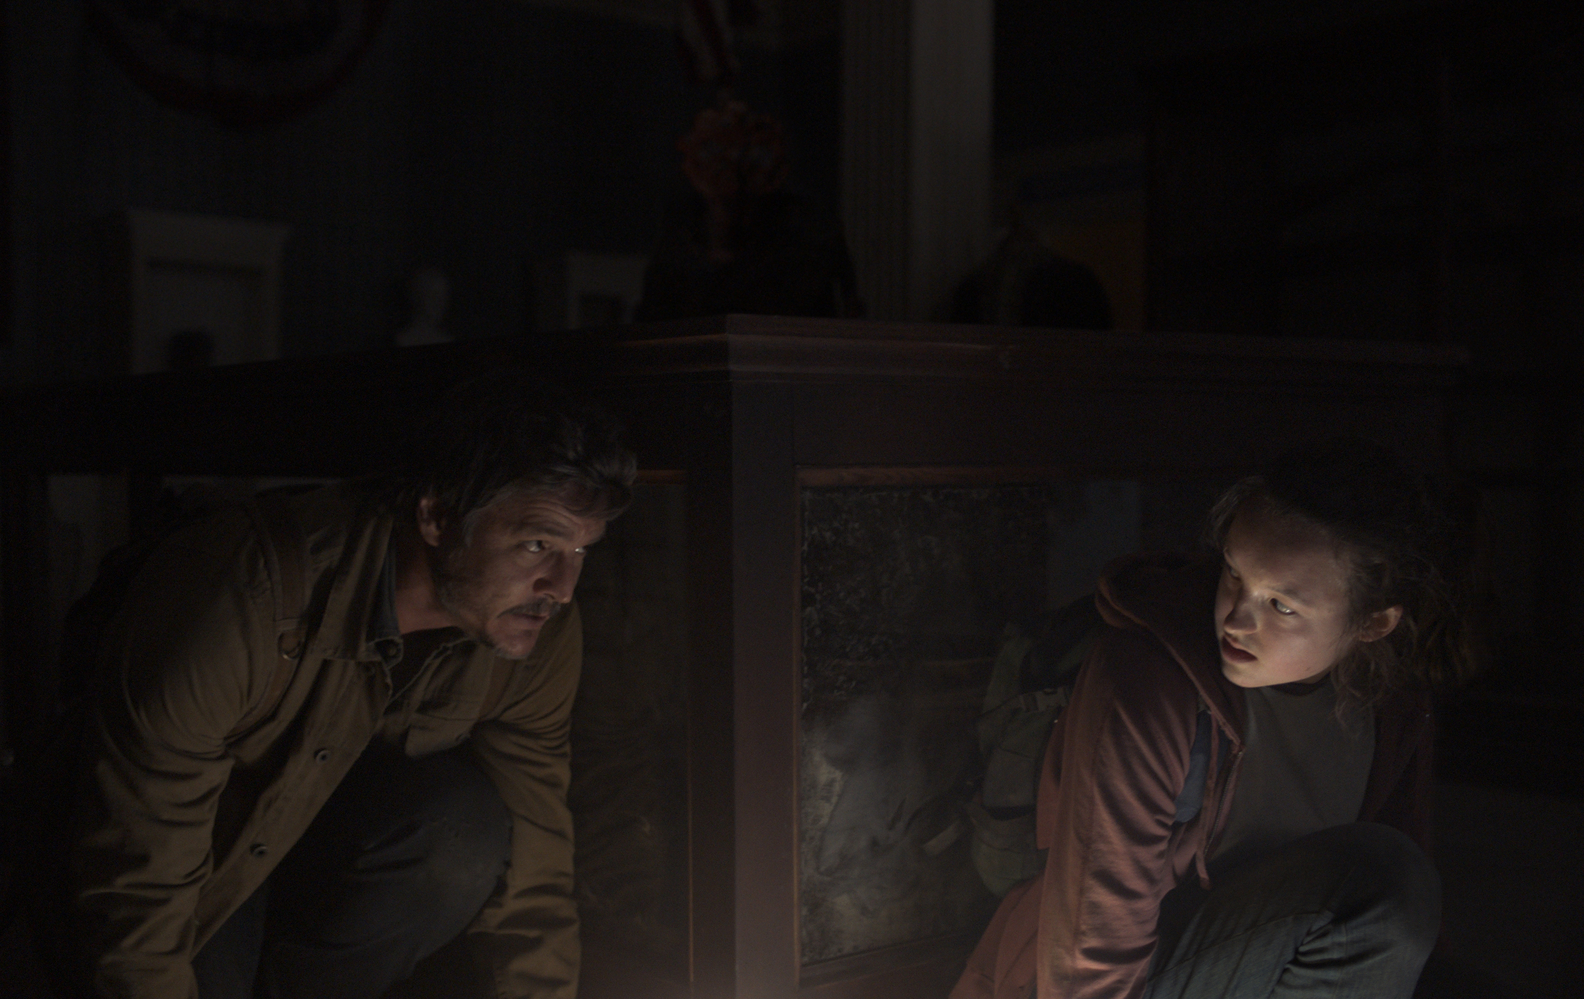 Pedro Pascal and Bella Ramsey as Joel and Ellie in The Last of Us HBO series